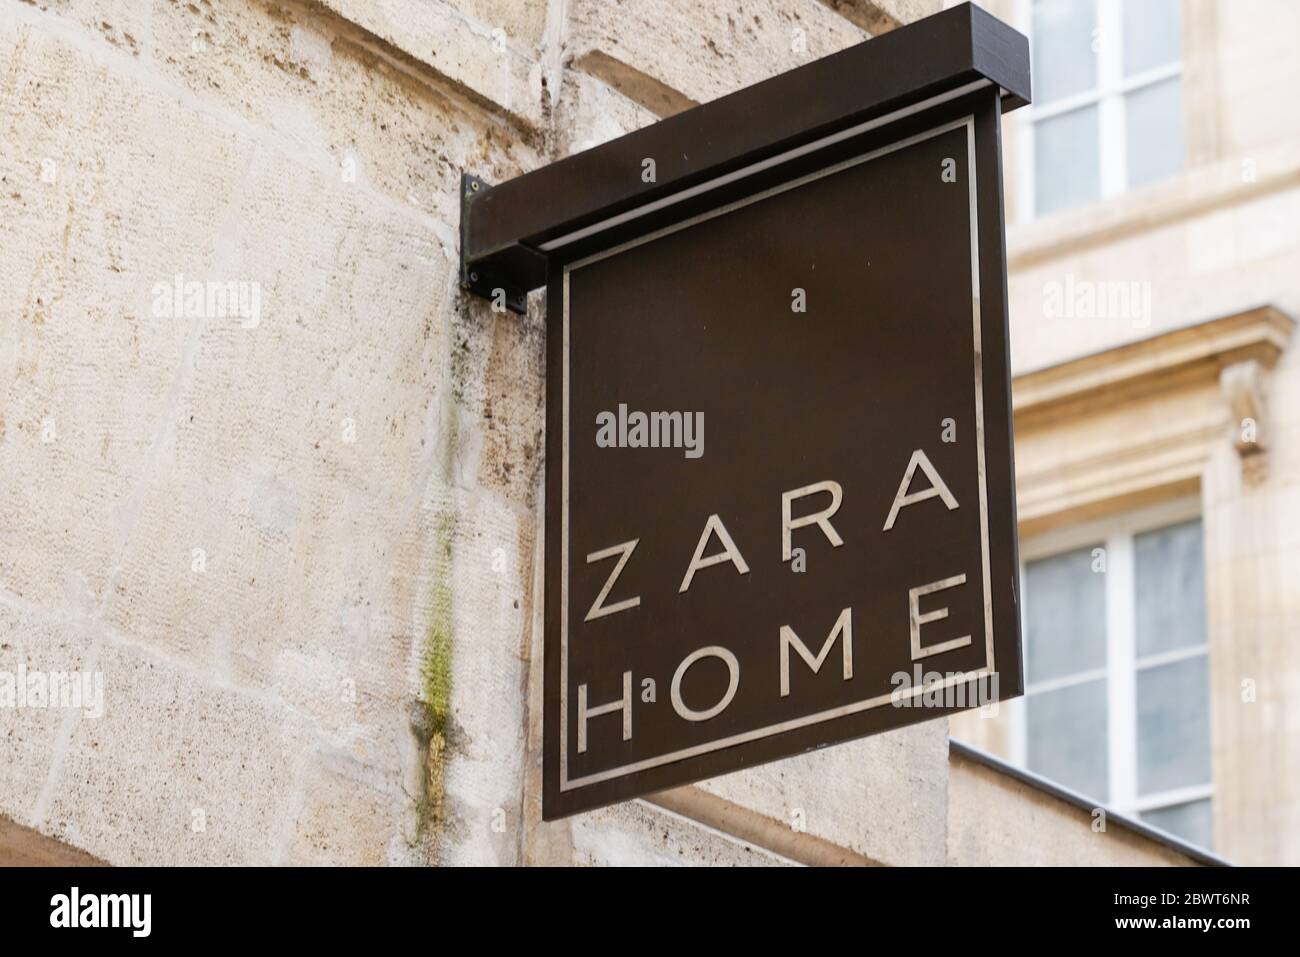 Bordeaux , Aquitaine / France - 06 01 2020 : zara home logo sign of spain  store company manufacturing of home textiles decoration Stock Photo - Alamy